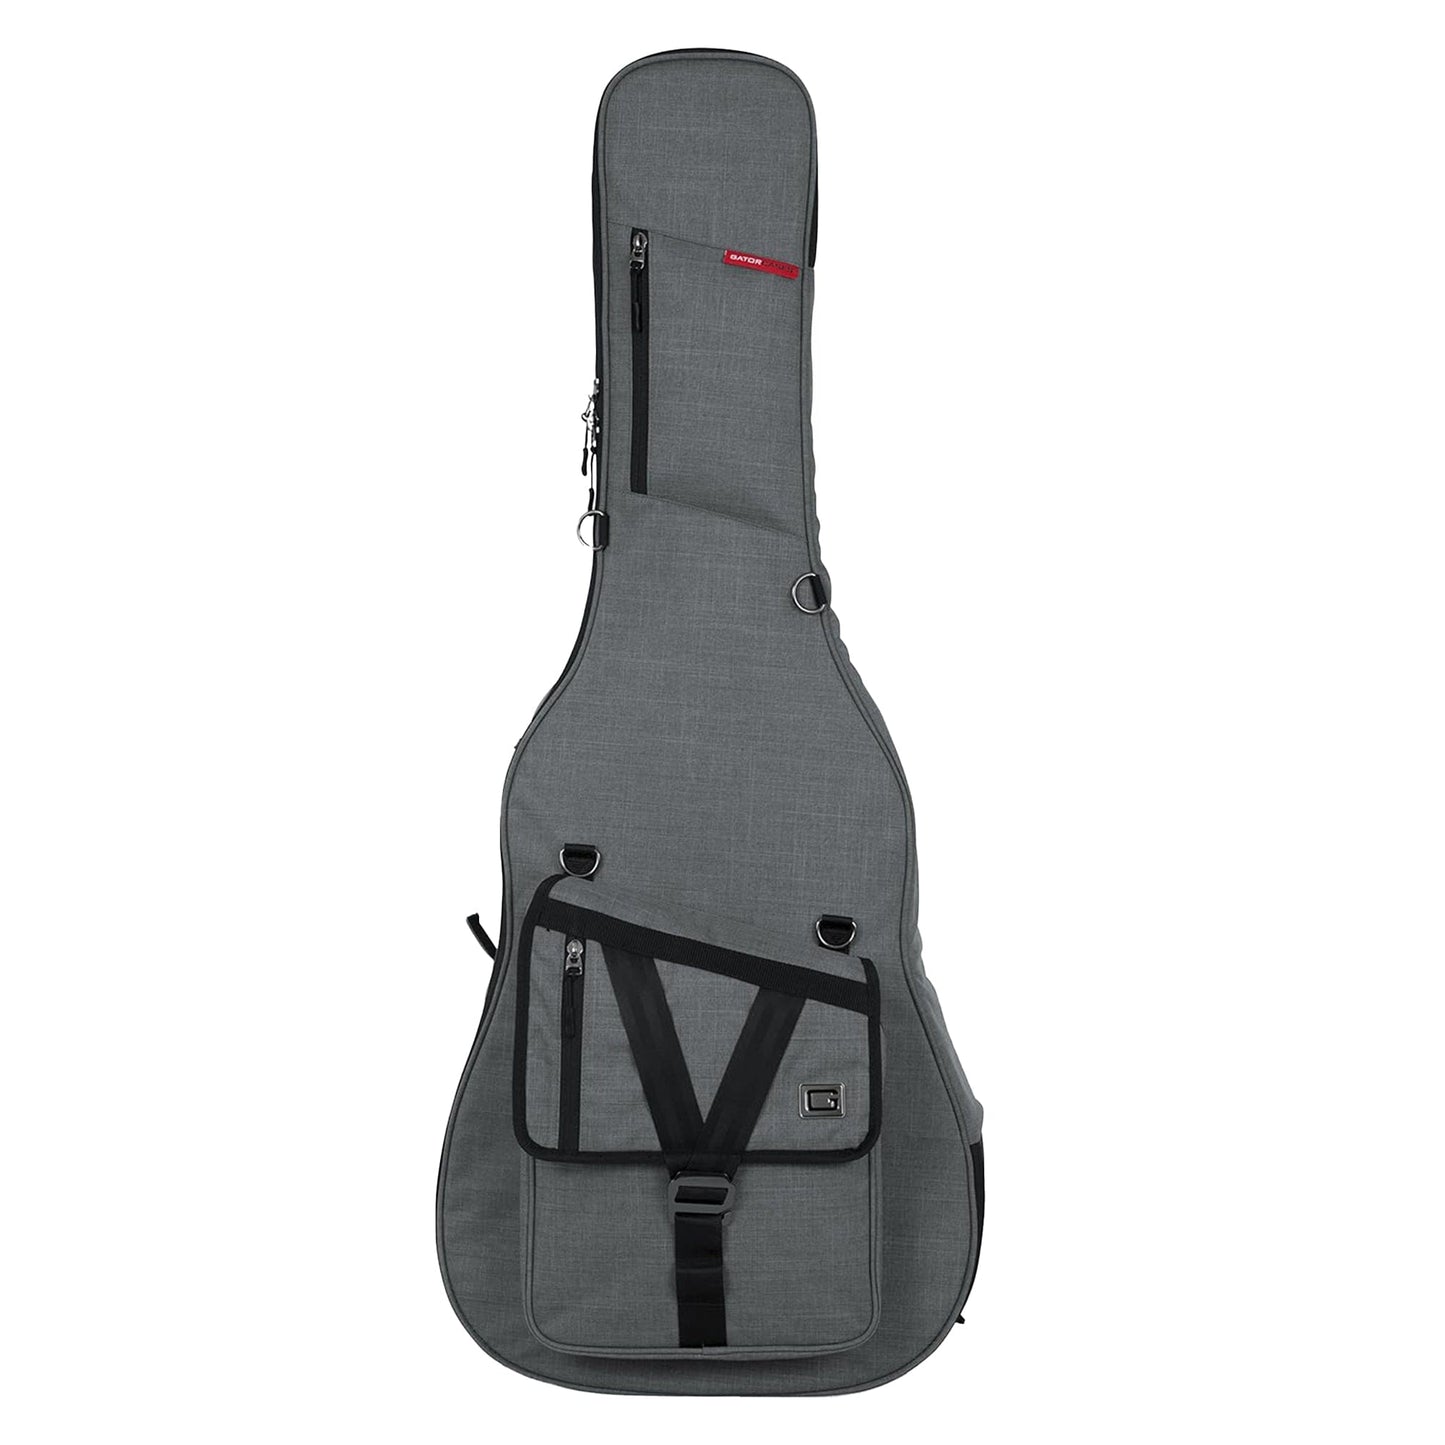 Gator Transit Acoustic Guitar Gig Bag Light Grey Accessories / Cases and Gig Bags / Guitar Cases